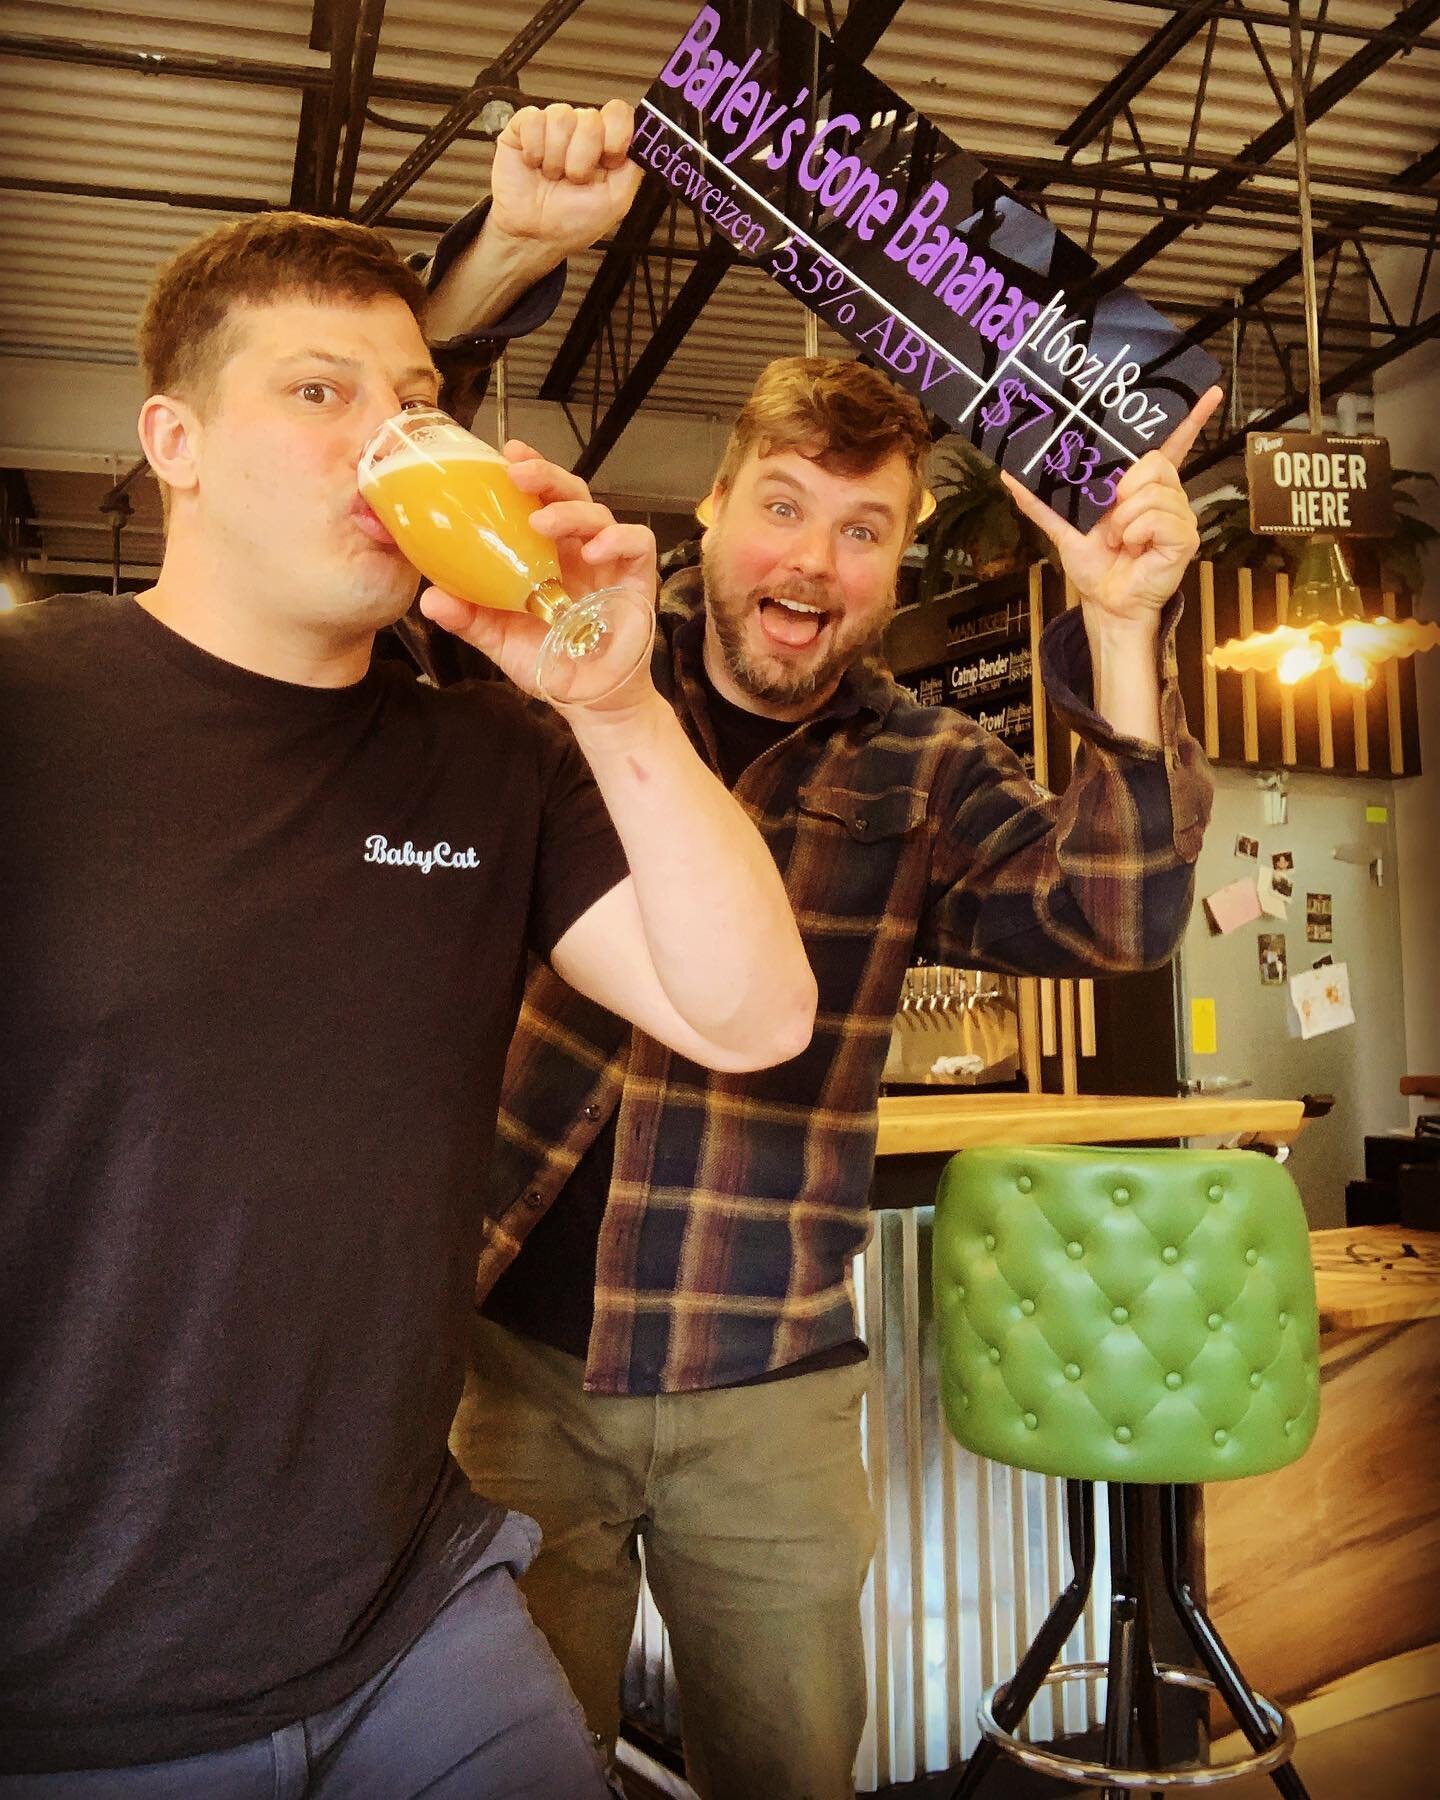 What&rsquo;s going on with Sam &amp; Phil? They&rsquo;re celebrating the launch of Barley&rsquo;s Gone Bananas! A Hefeweizen, Barley&rsquo;s is delicious with notes of banana &amp; clove. A wheat beer, it has a bit of spice yet is very smooth. We are